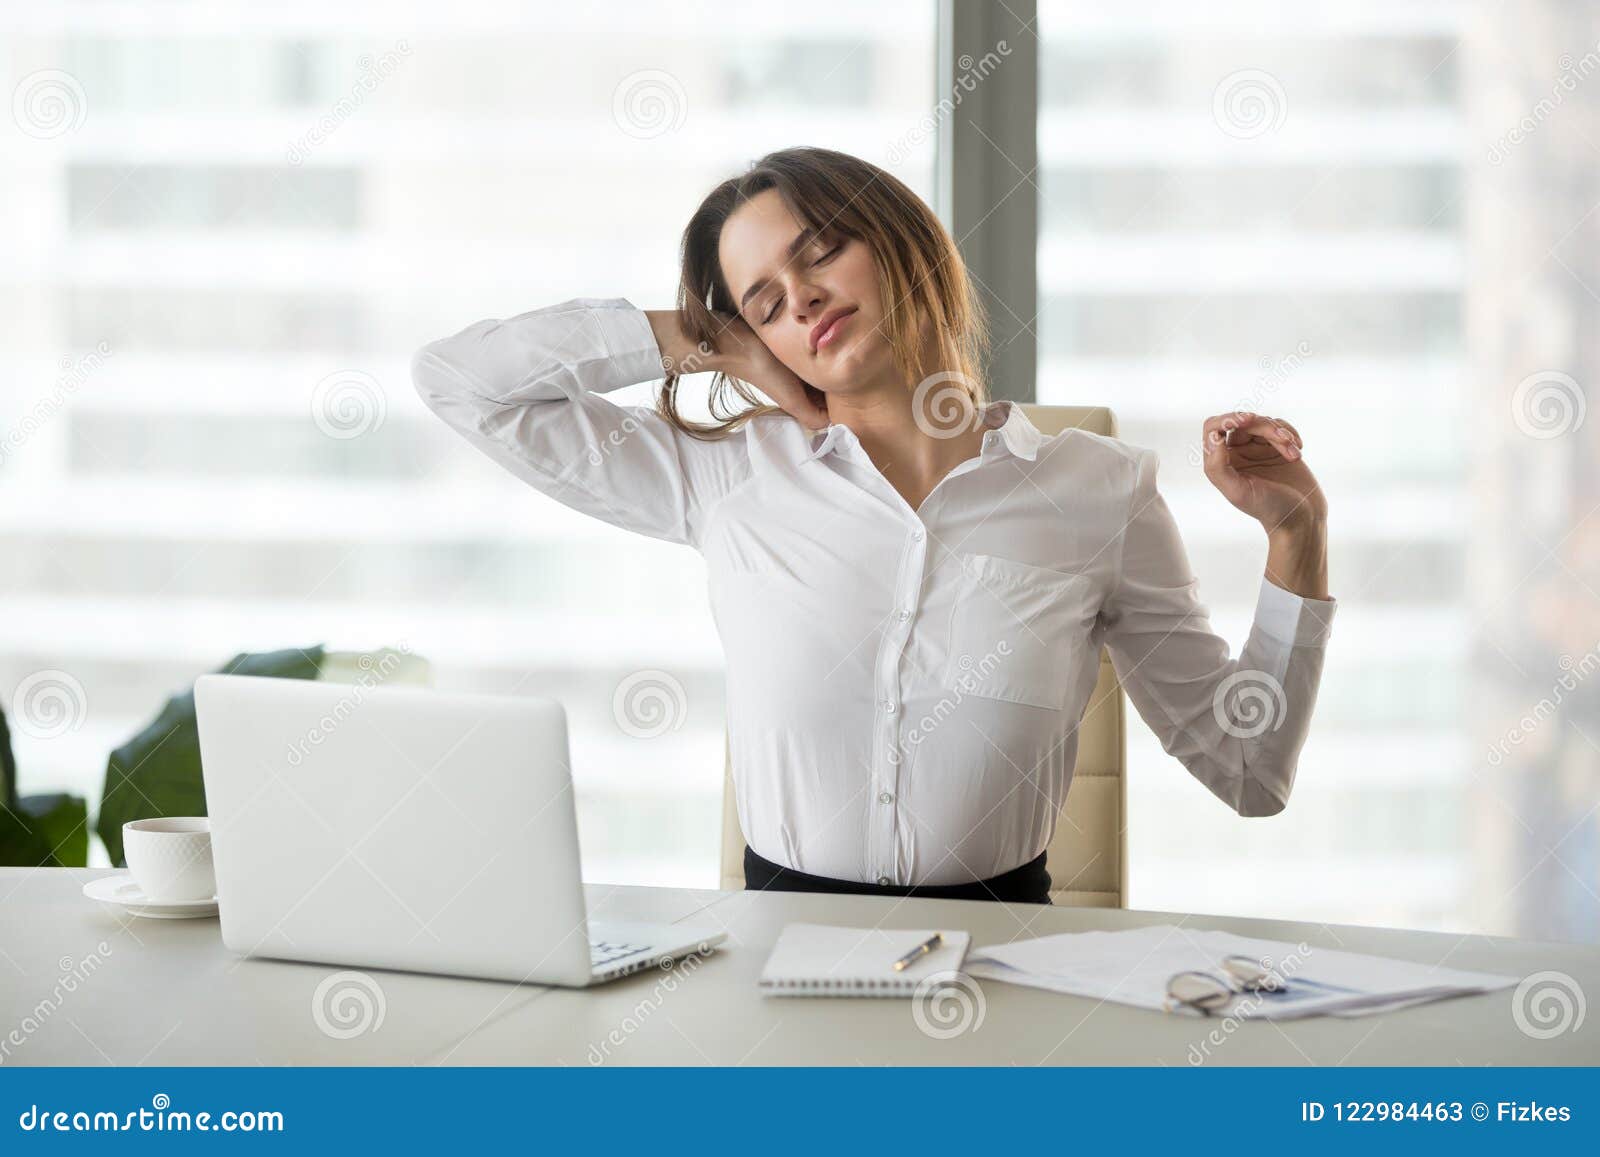 exhausted businesswoman taking break from sedentary work stretch